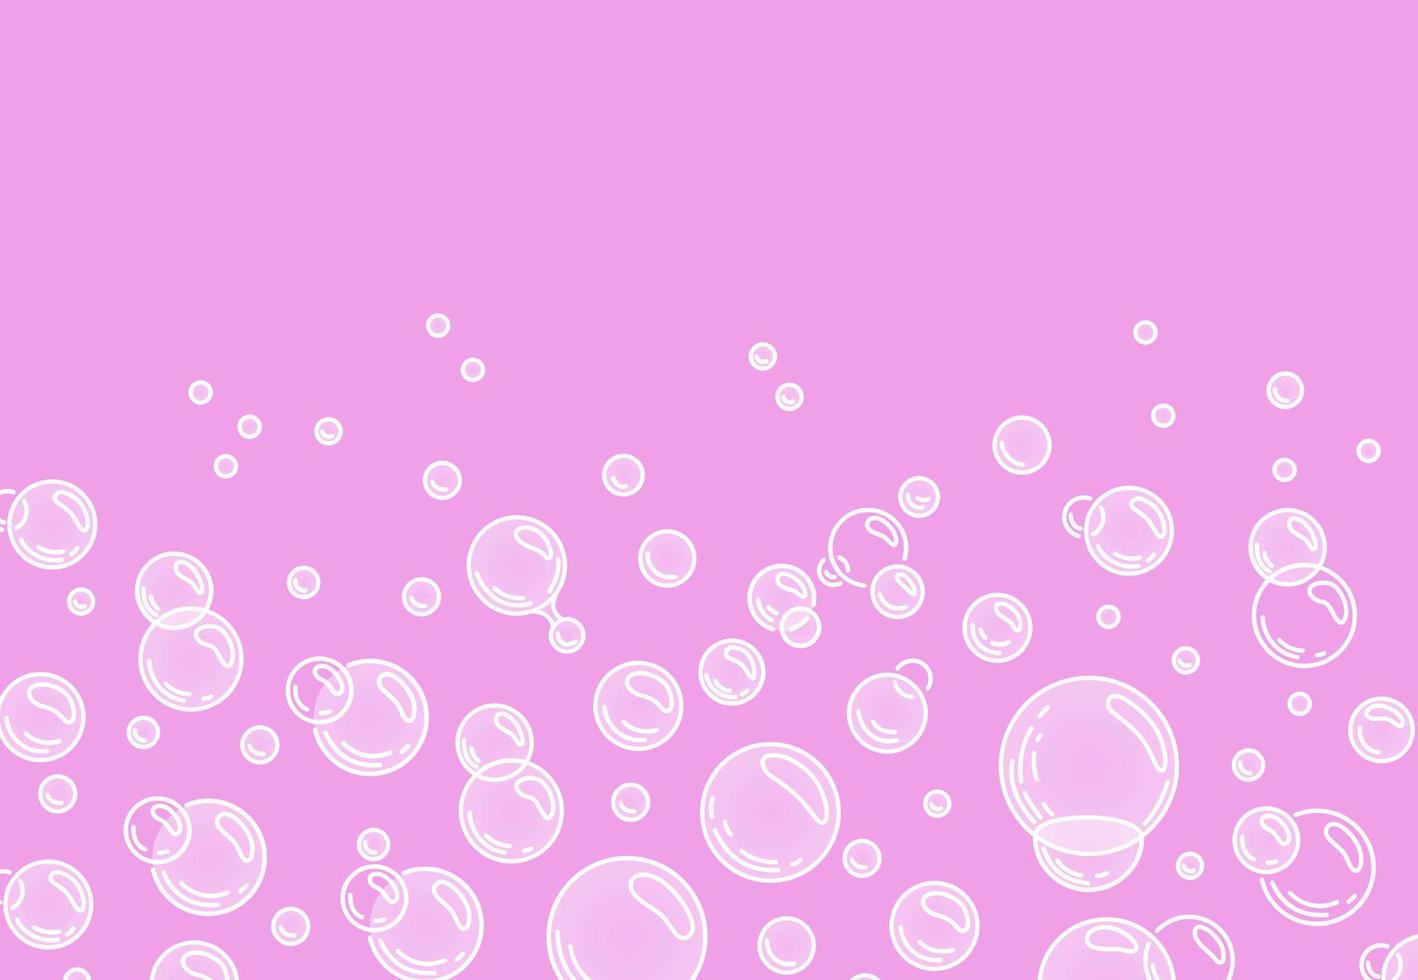 Bubbles on a pink background.Fizzing air or water bubbles on white background. Fizzy sparkles. Gum. Vector cartoon illustration. Vector illustration